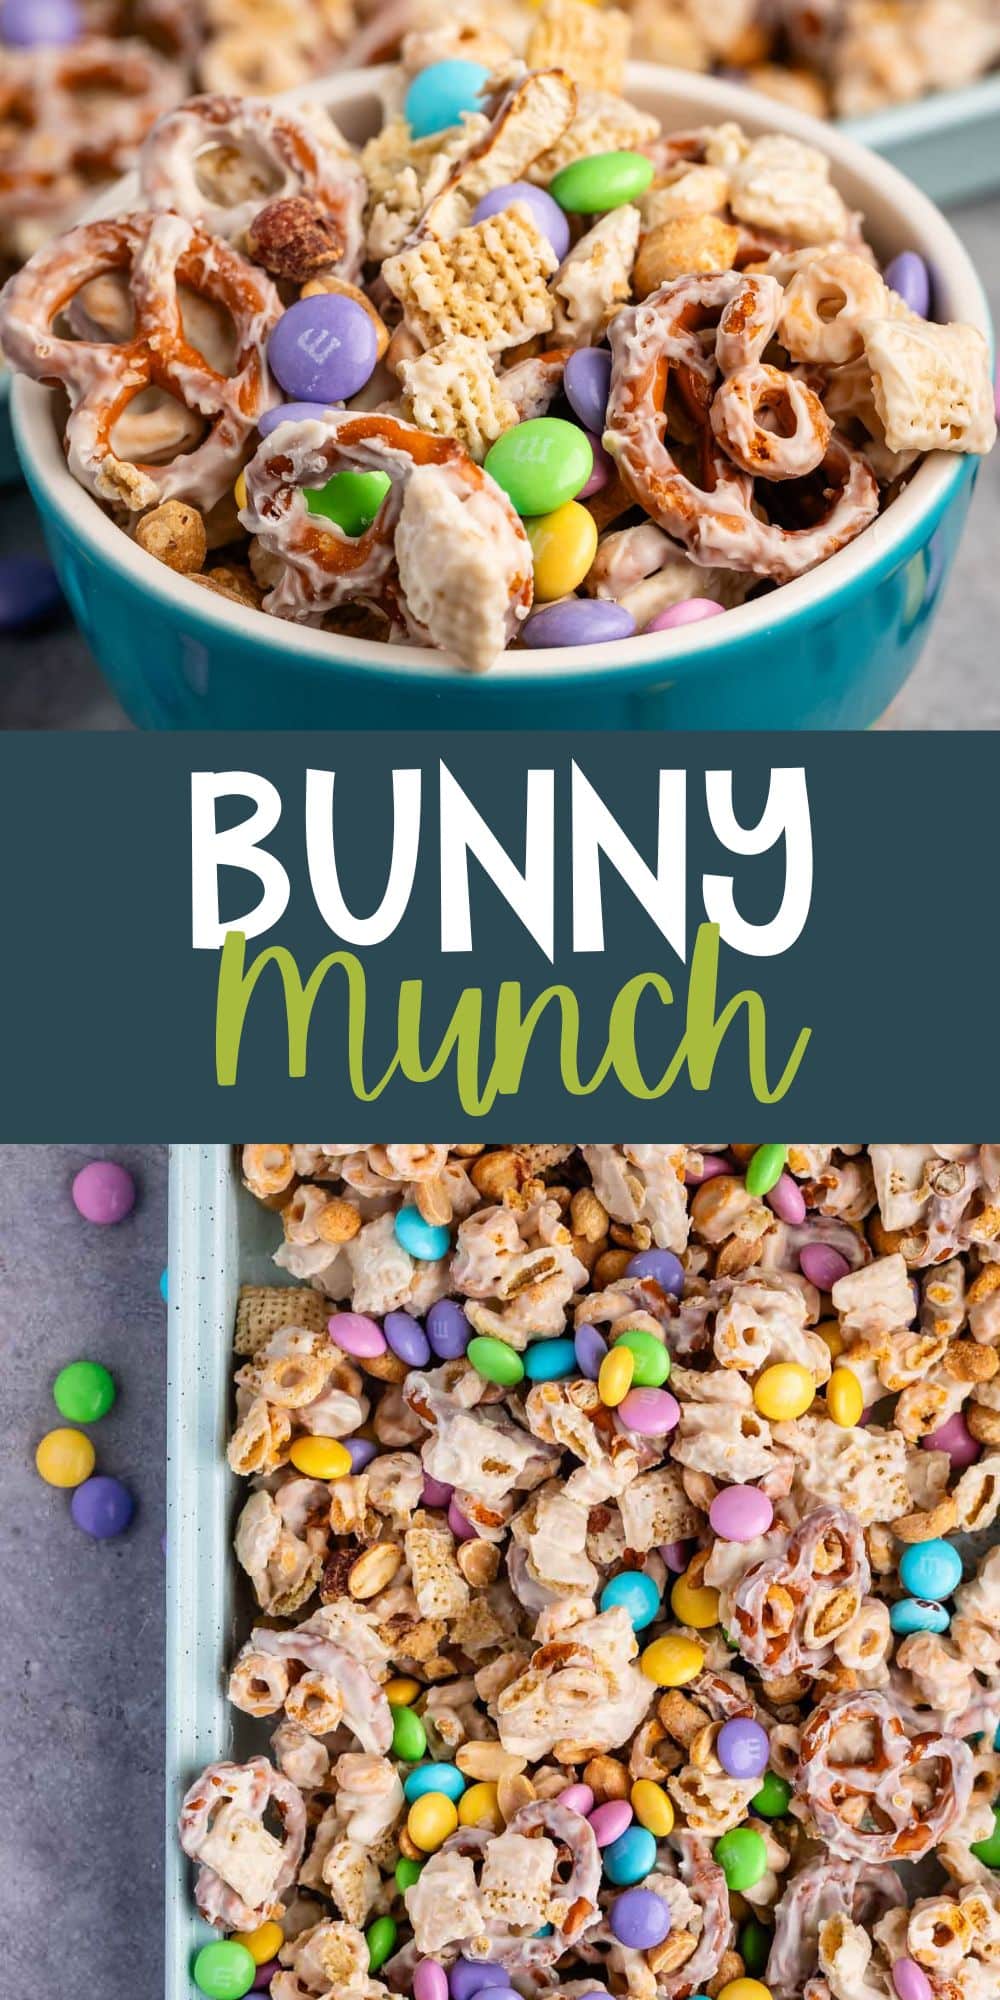 two photos of bunny munch mixed in a teal bowl with white chocolate with words on the image.